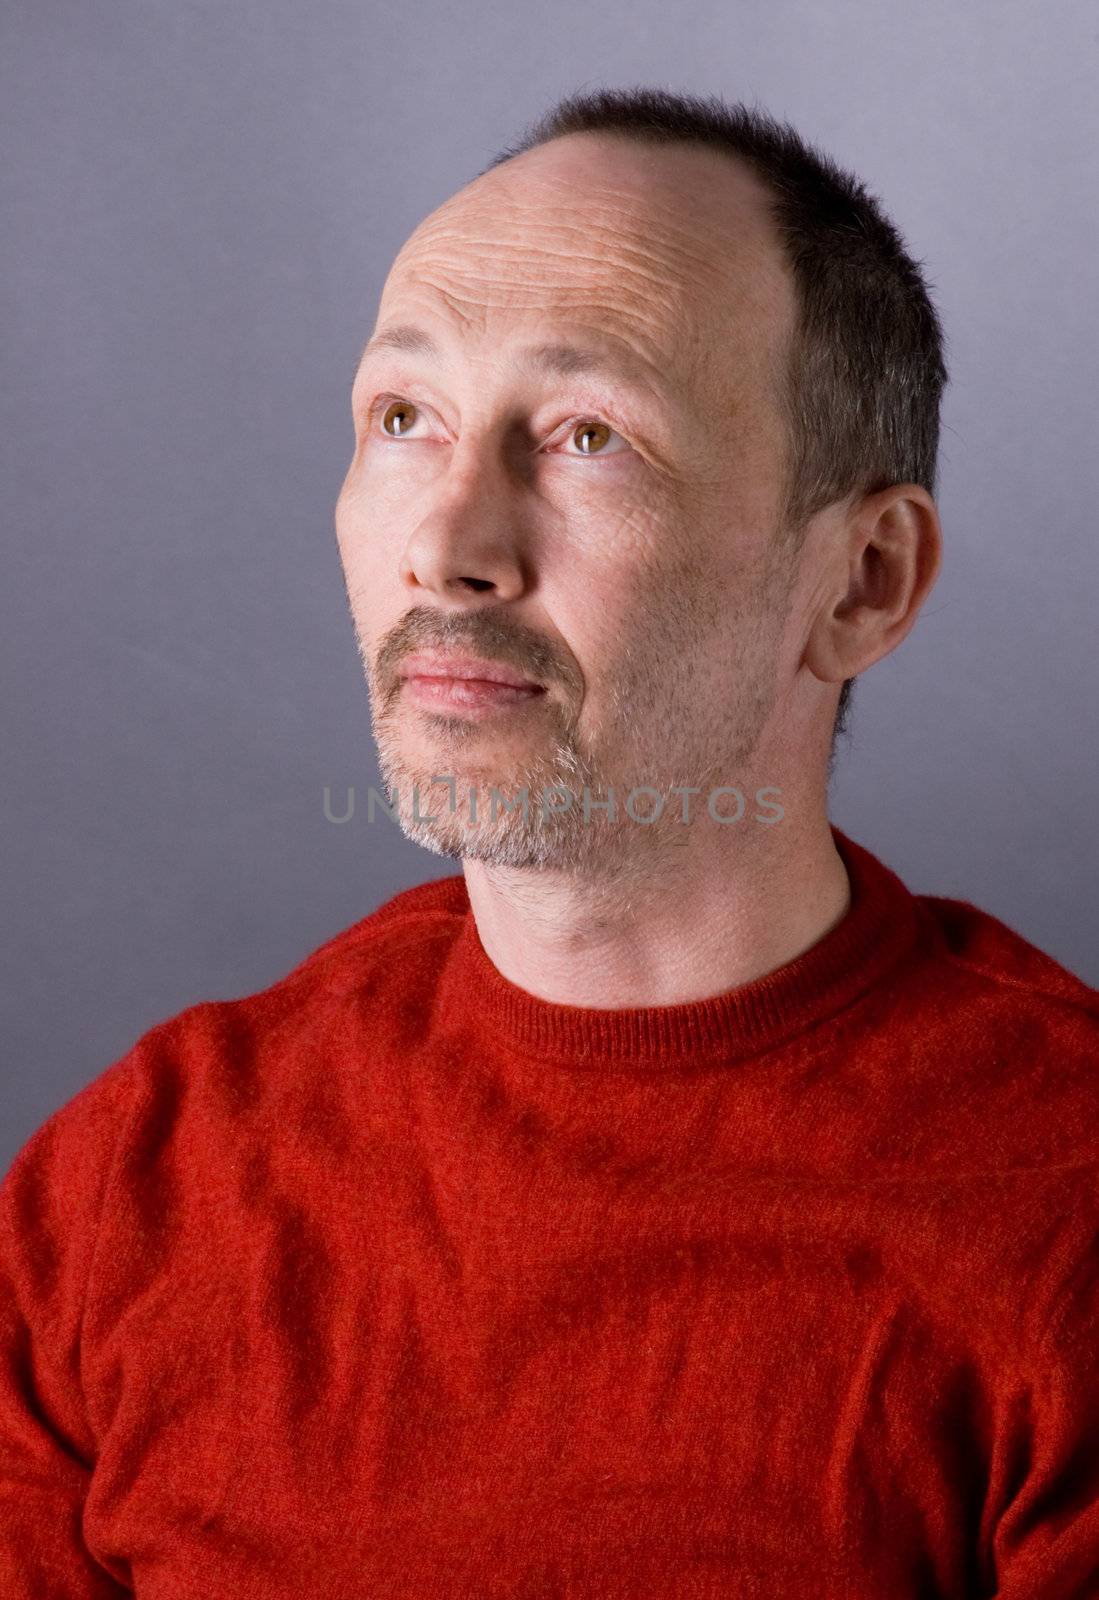 The man in a red sweater sits on a chair